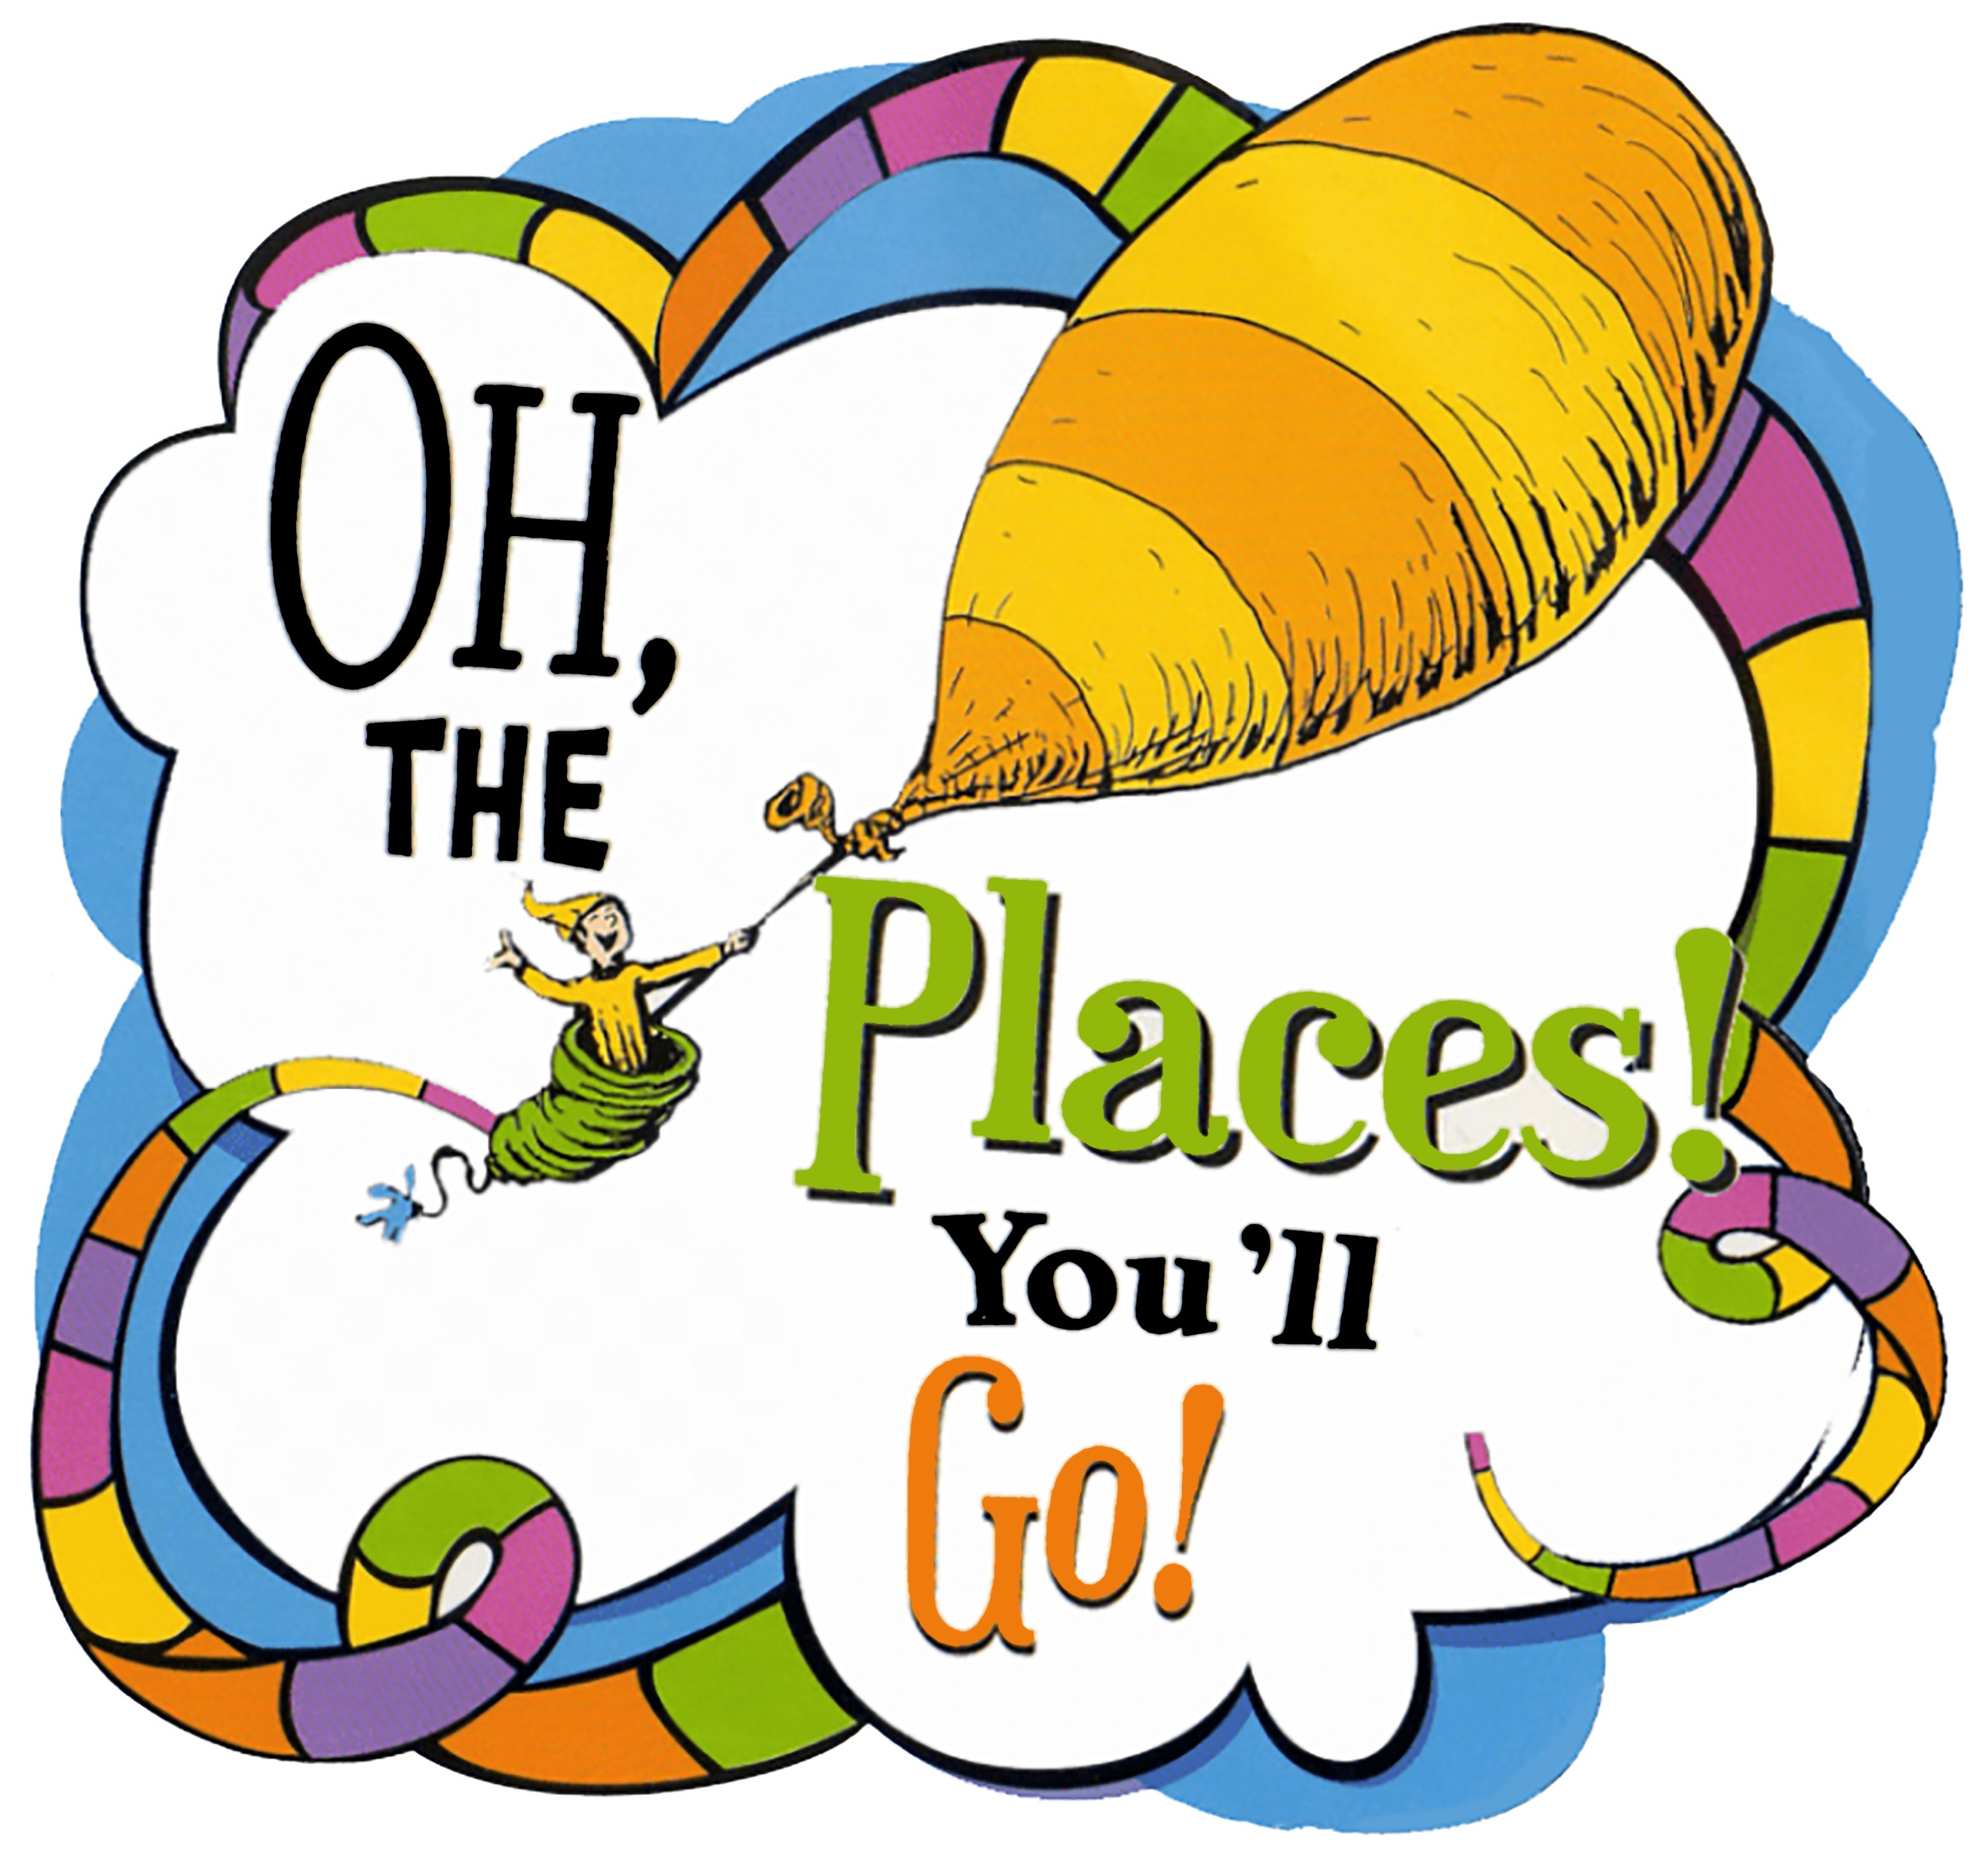 Dr seuss oh the places youll go sleeve tattoo ideas